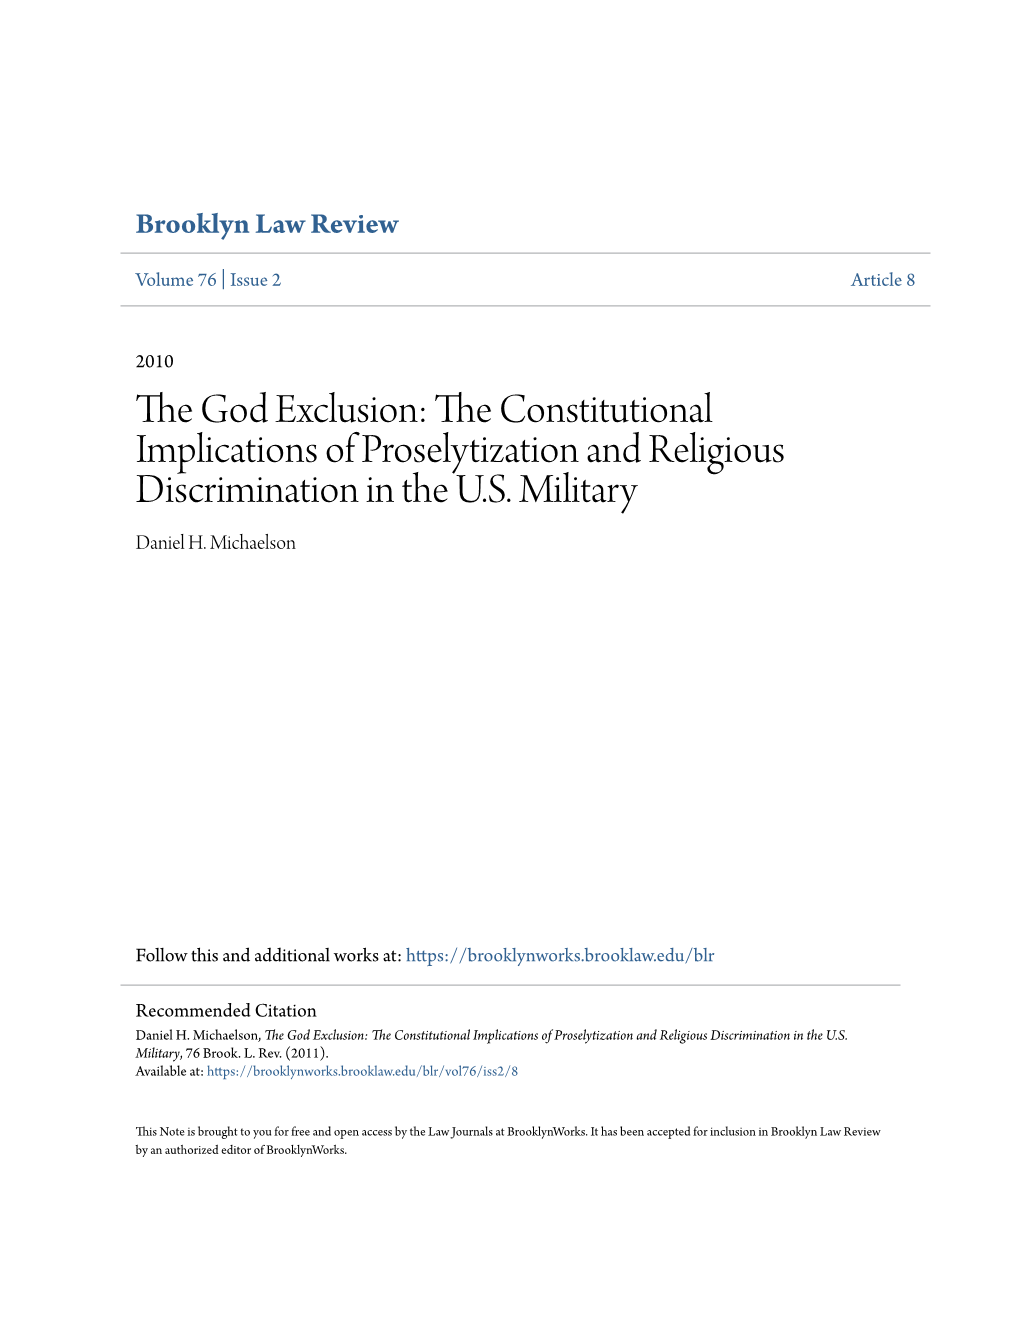 The Constitutional Implications of Proselytization and Religious Discrimination in the U.S